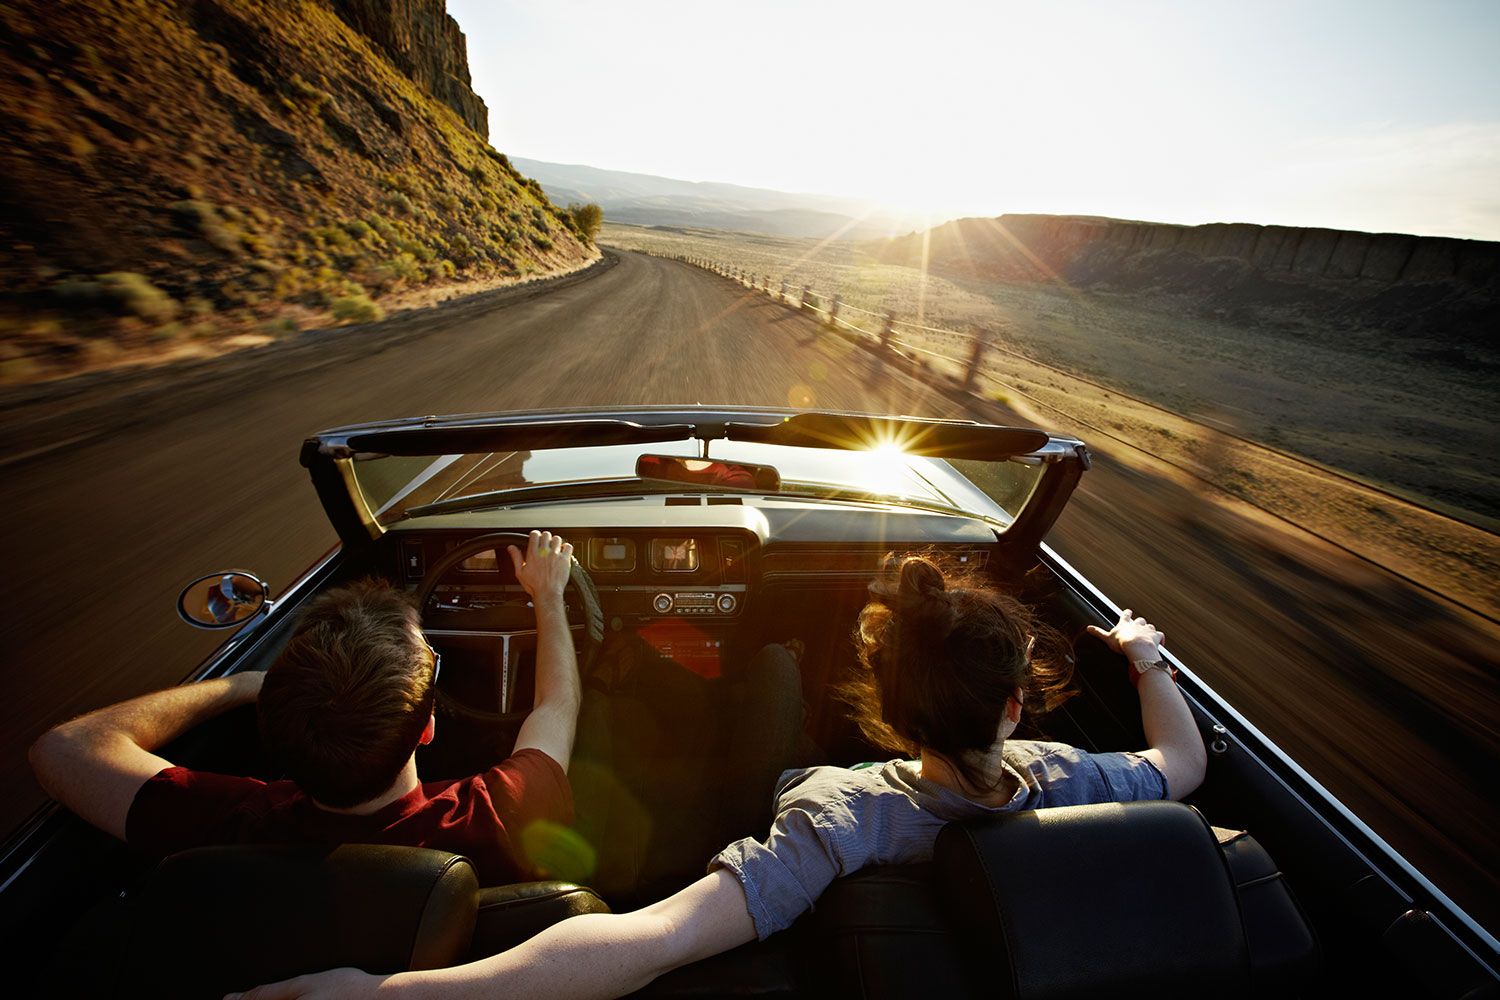 12 Reasons To Go On a Road Trip This Summer